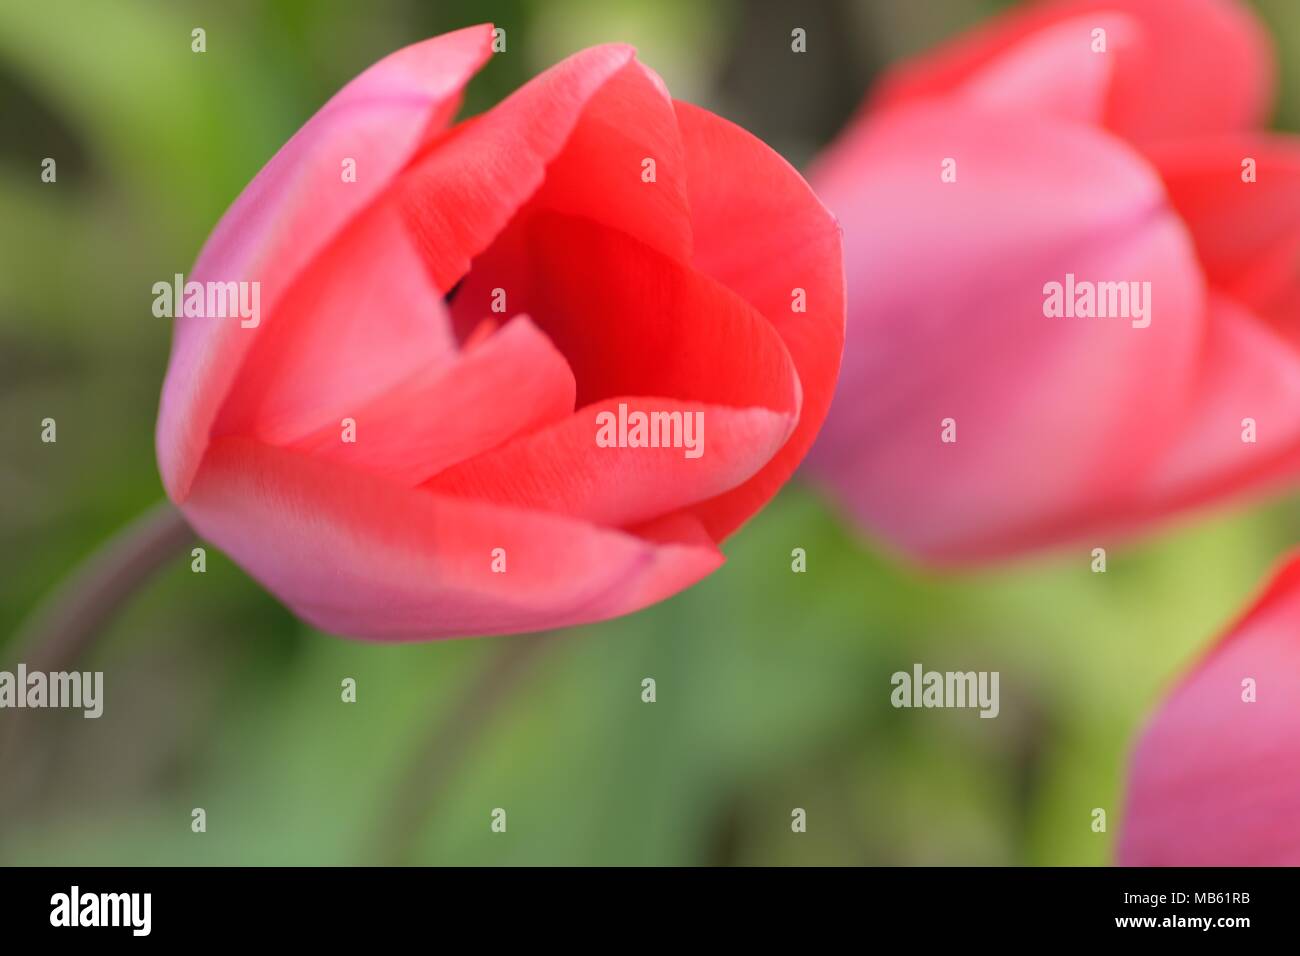 Macro background texture of colorful Tulip flowers in garden Stock Photo